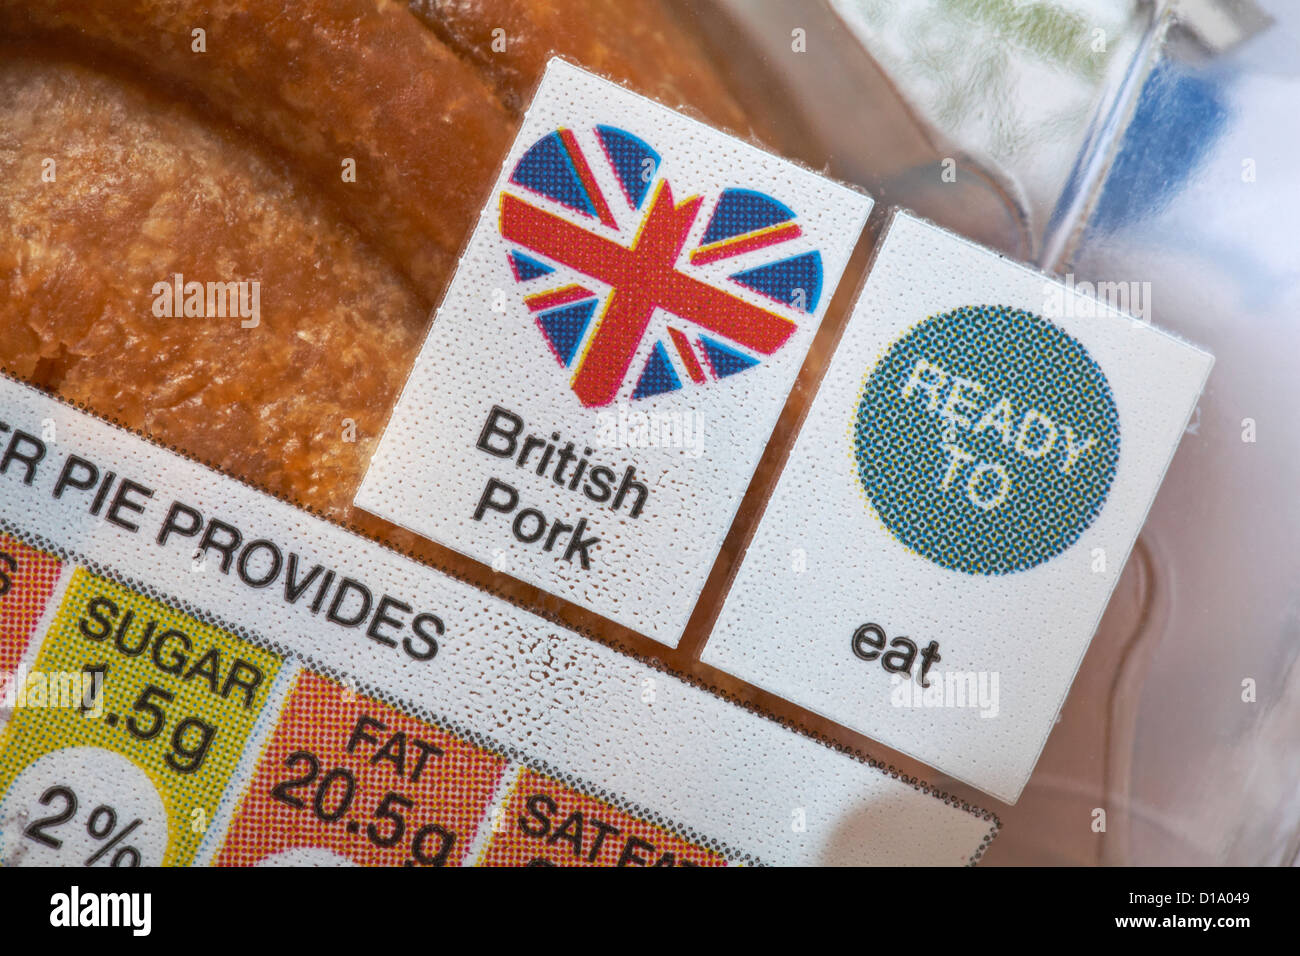 British pork ready to eat - information on packet of pork pies Stock Photo